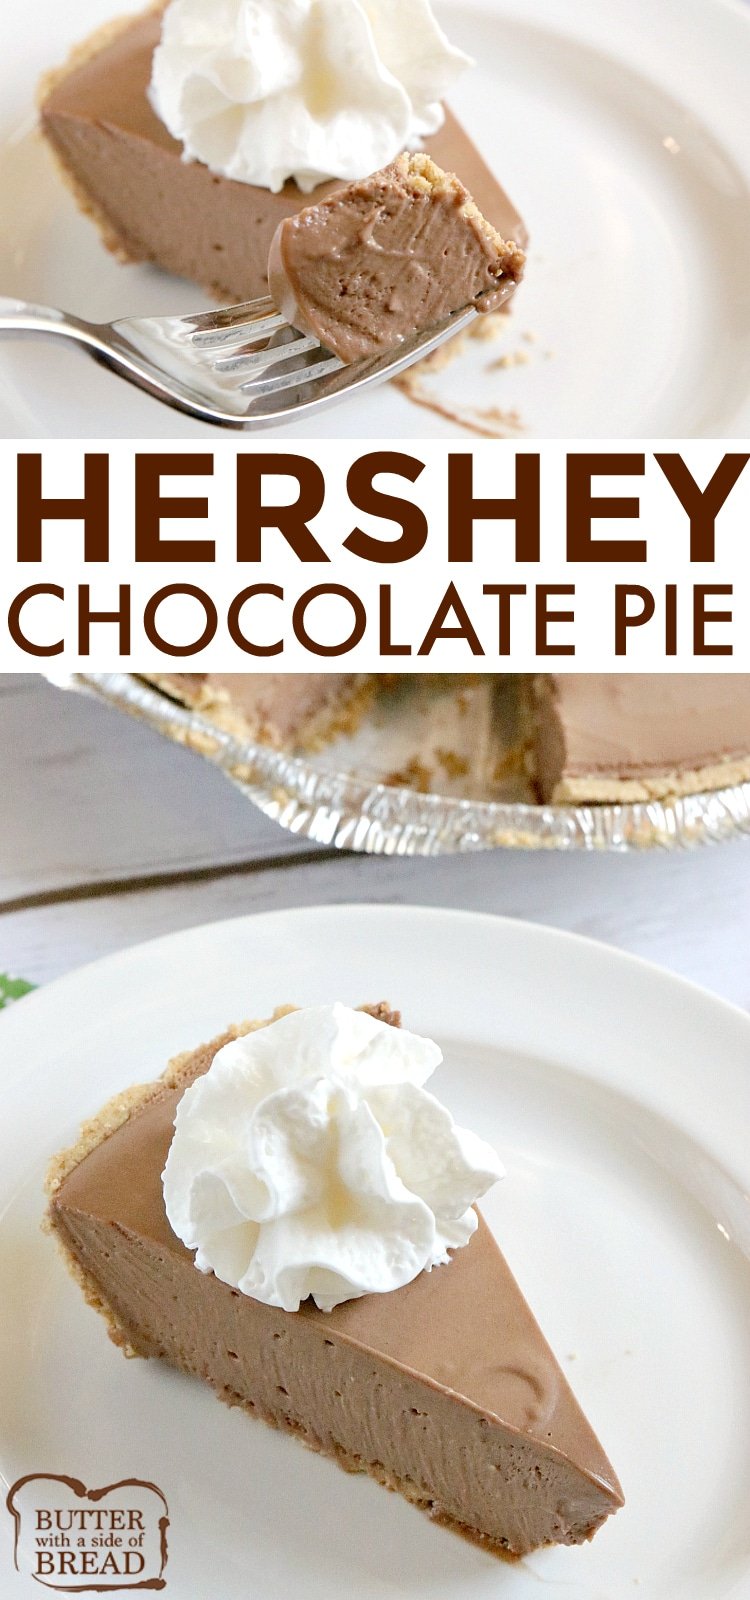 Hershey Chocolate Pie is a no-bake chocolate pie made with melted marshmallows, melted Hershey bars and real whipped cream in a graham cracker crust. This easy chocolate pie recipe is so simple to make and is rich, chocolatey and absolutely delicious! 